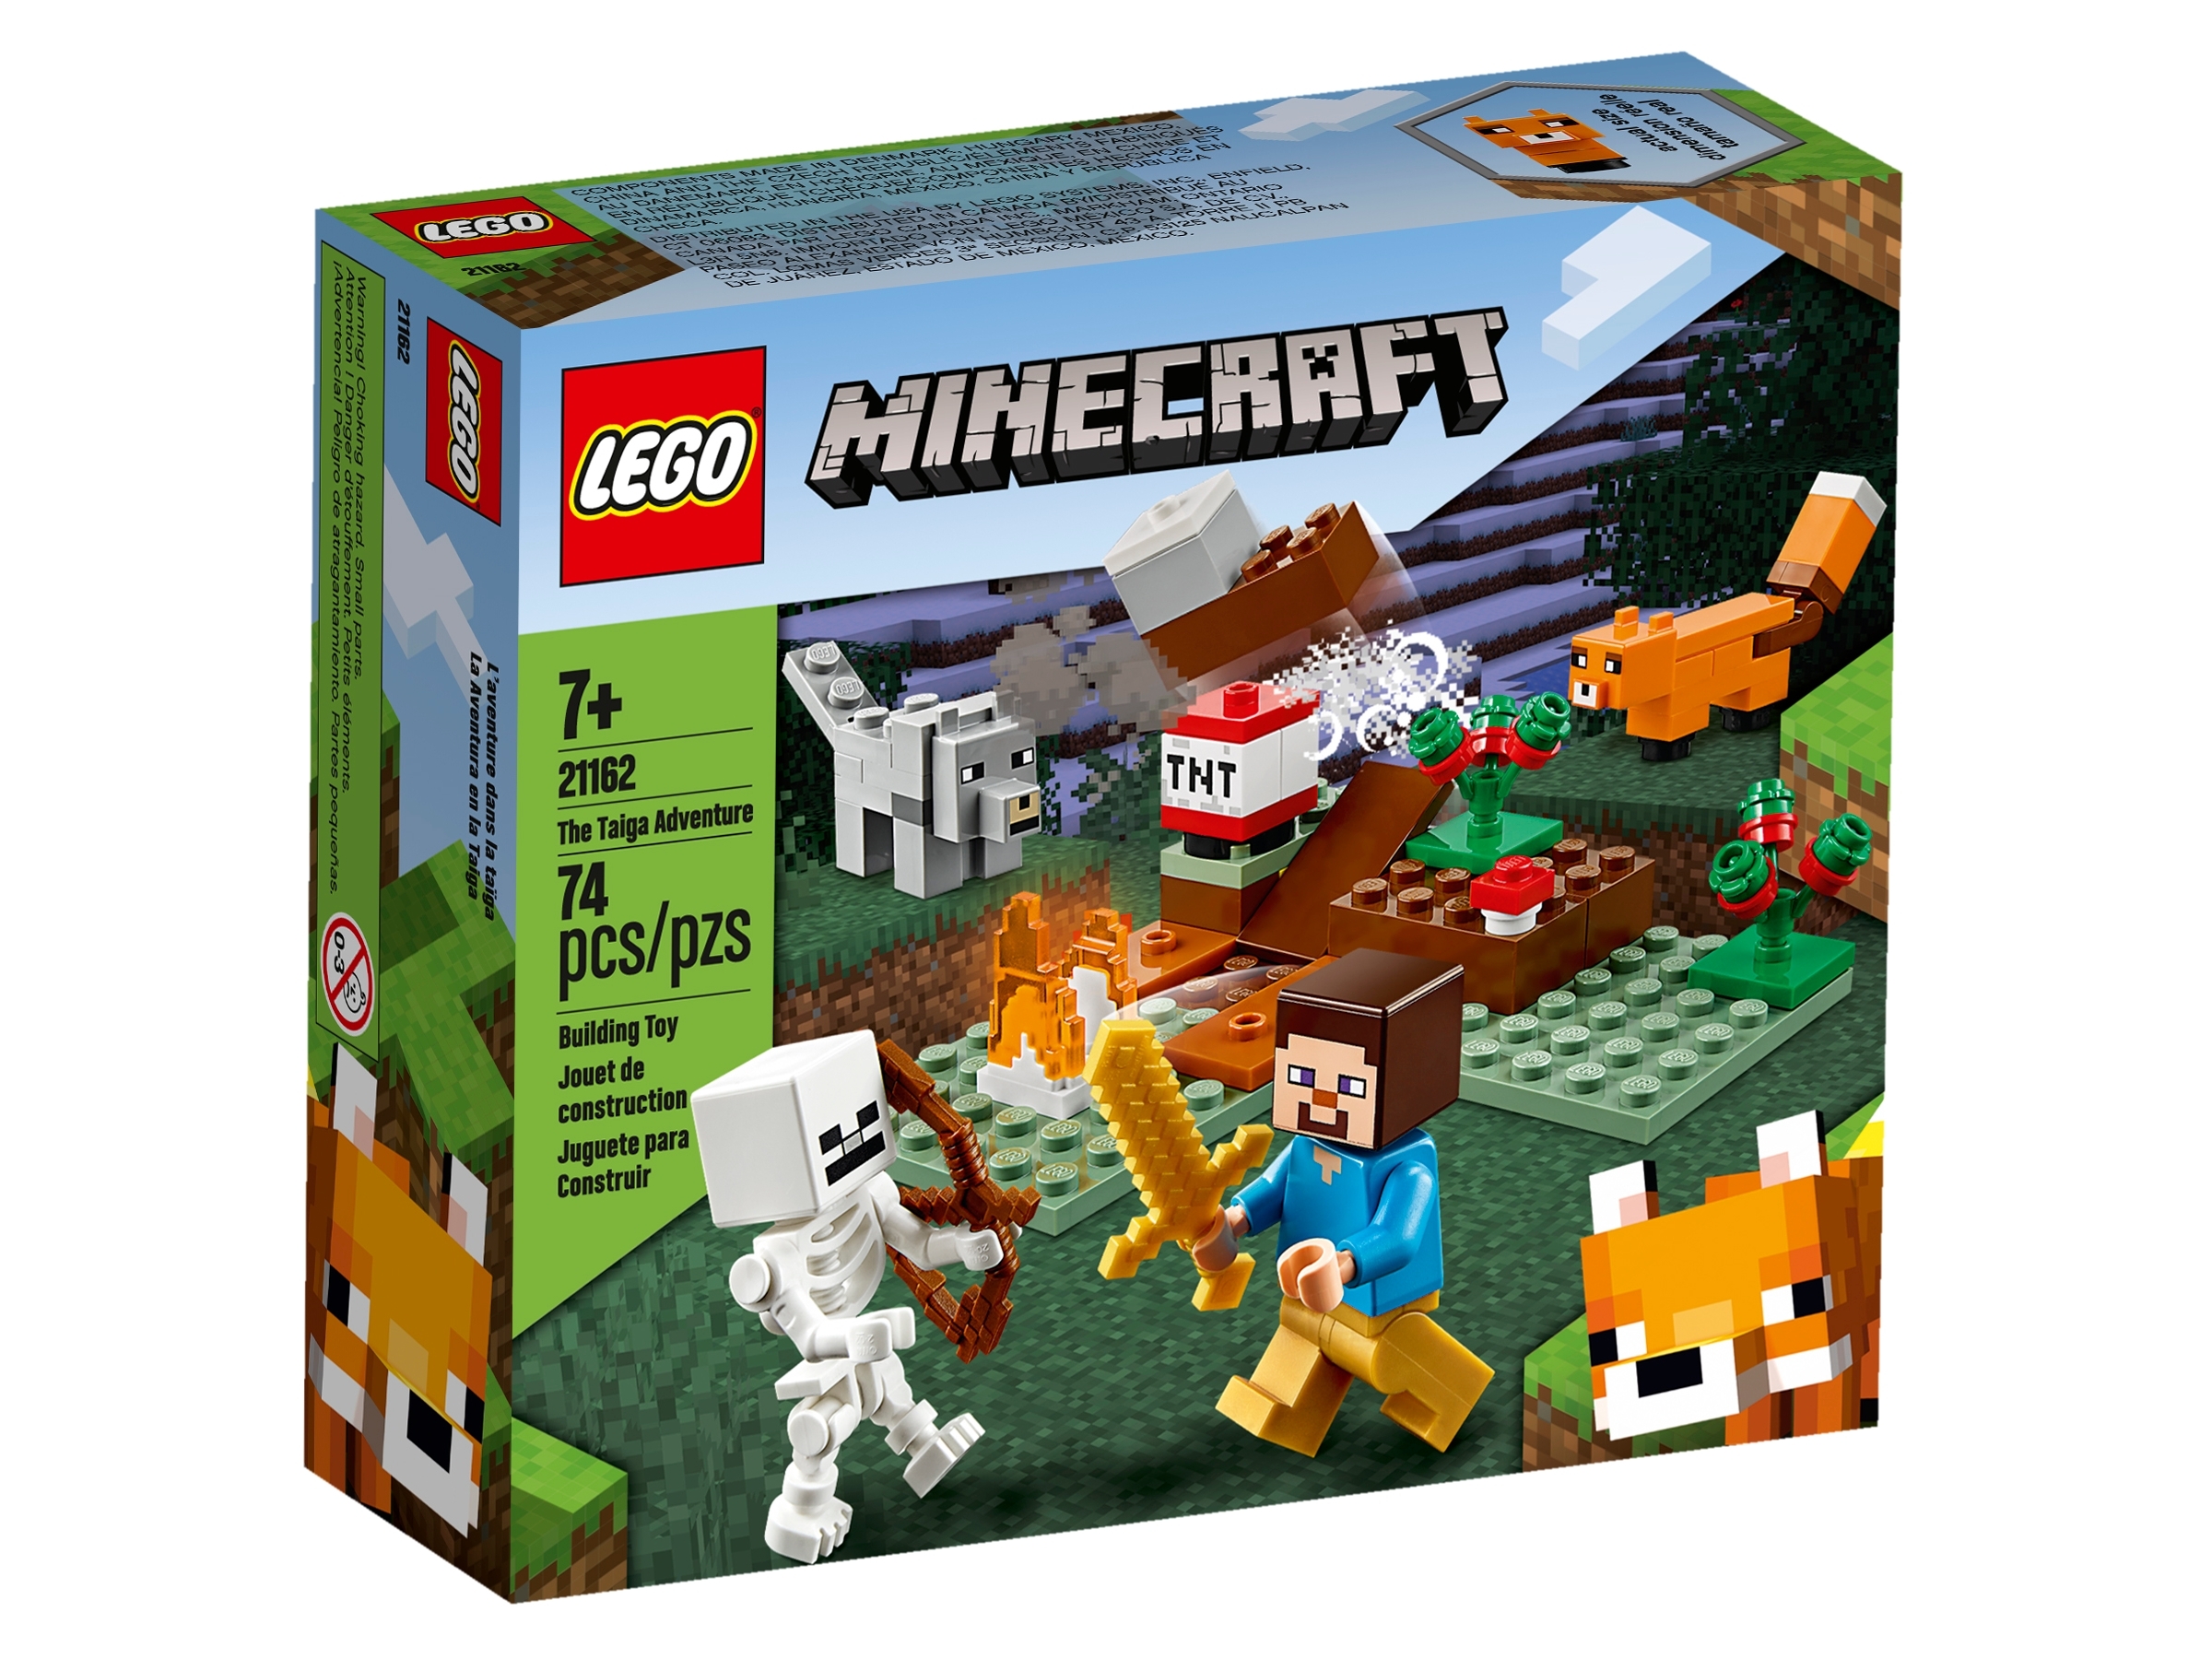 New 2020 LEGO Minecraft The Taiga Adventure 21162 Brick Building Toy for Kids Who Love Minecraft and Imaginative Play 74 Pieces 